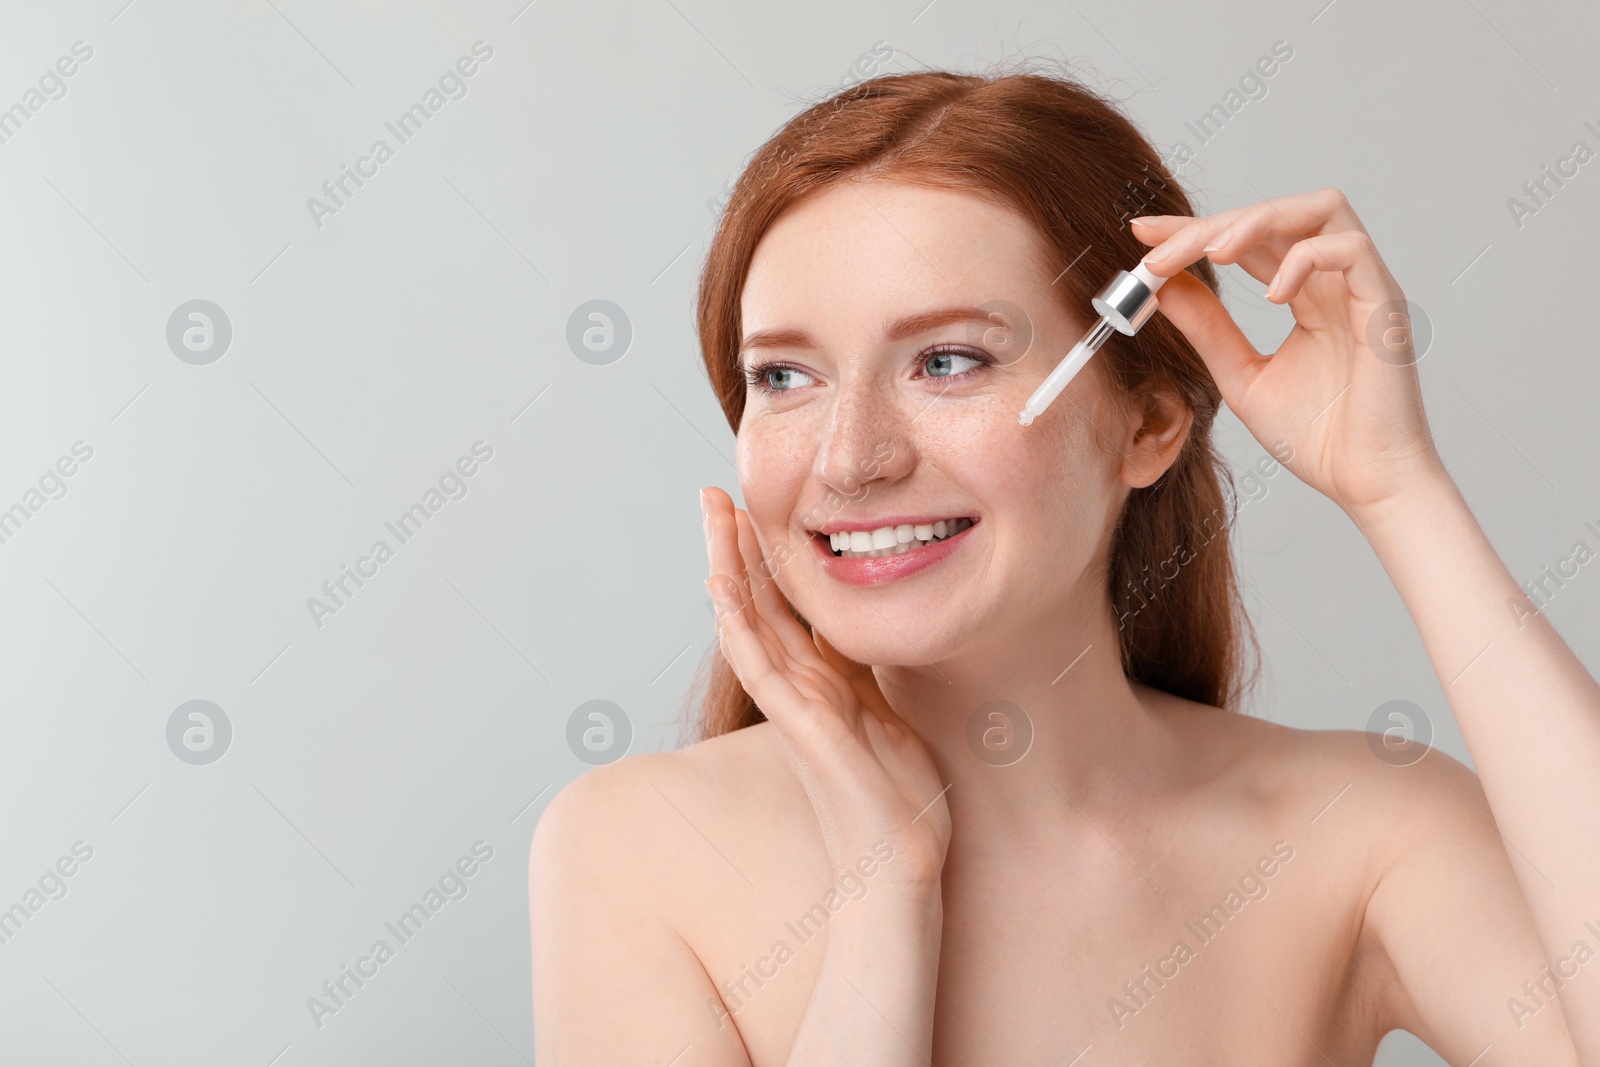 Photo of Smiling woman with freckles applying cosmetic serum onto her face against grey background. Space for text